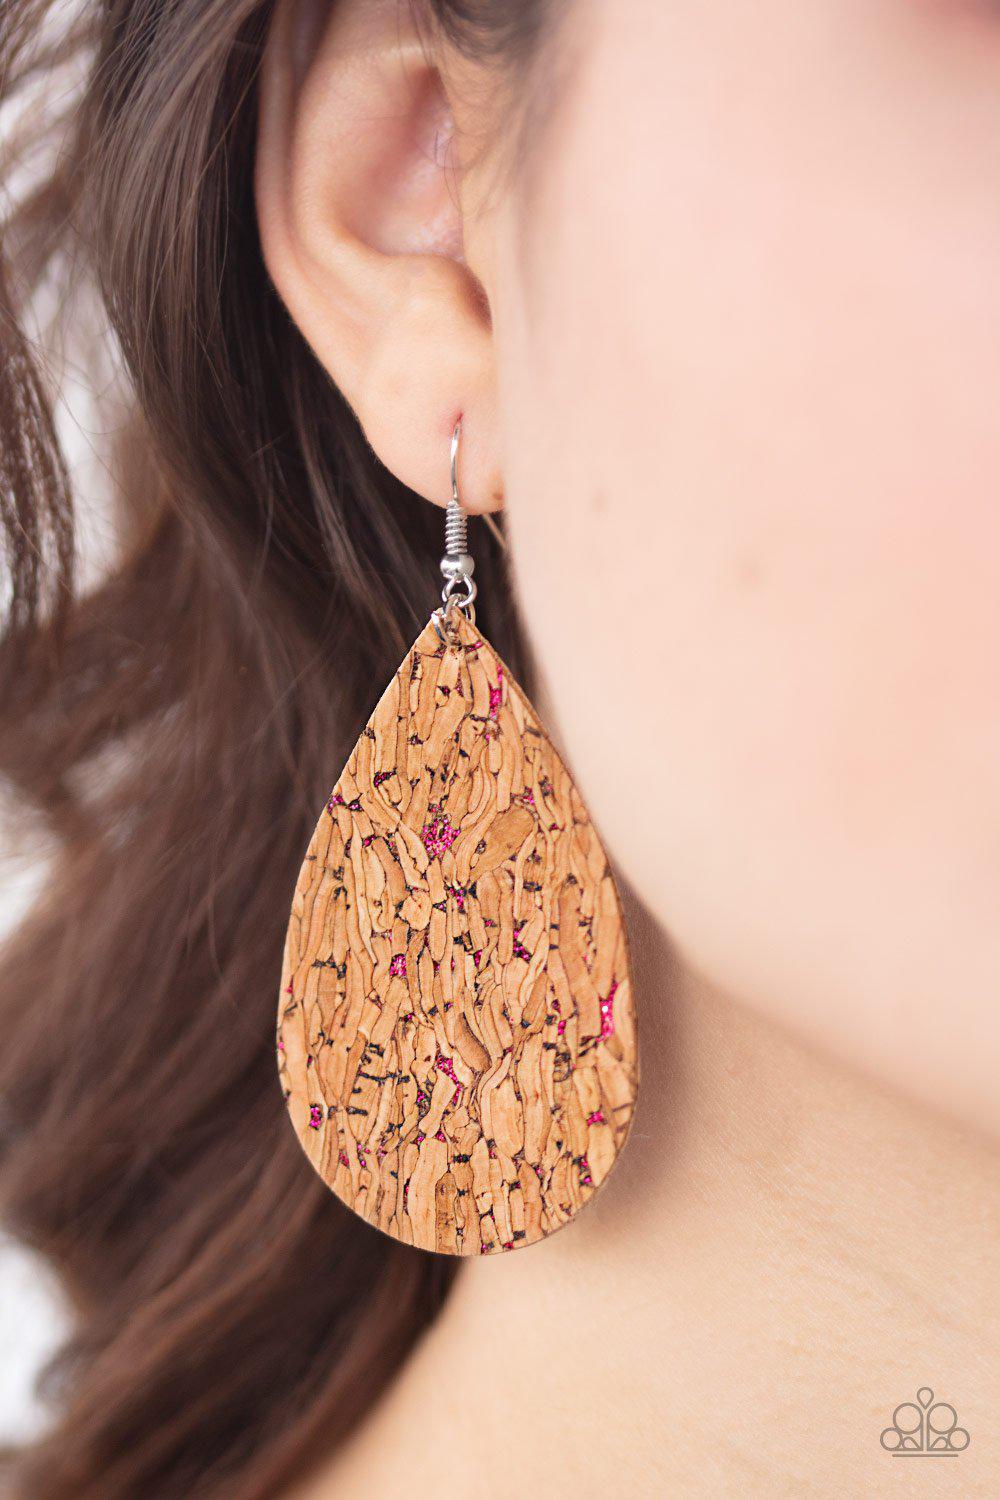 CORK It Over Pink and Cork Teardrop Earrings - Paparazzi Accessories-CarasShop.com - $5 Jewelry by Cara Jewels